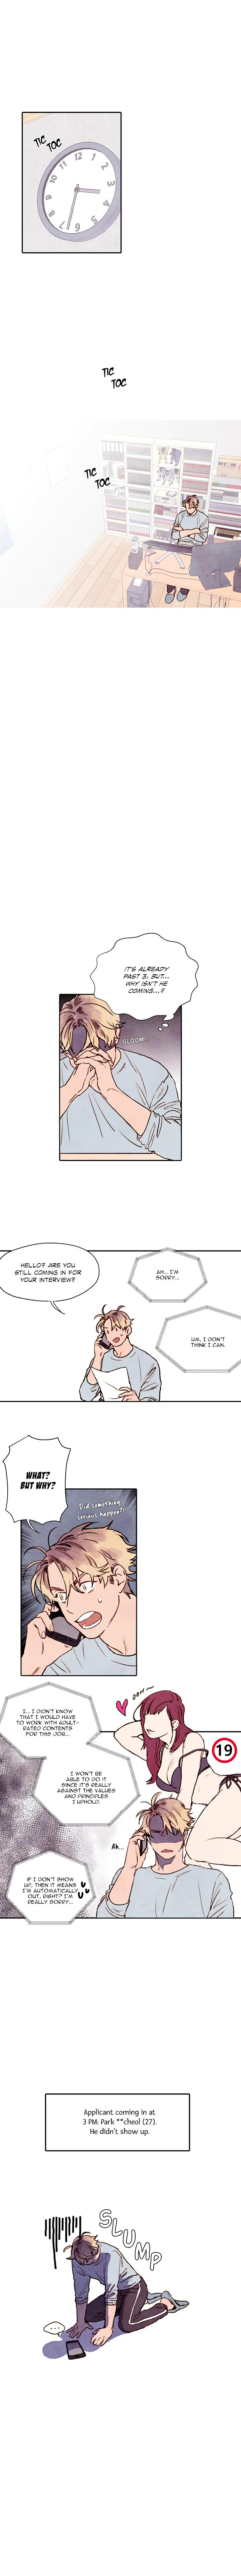 Oh my assistant manga